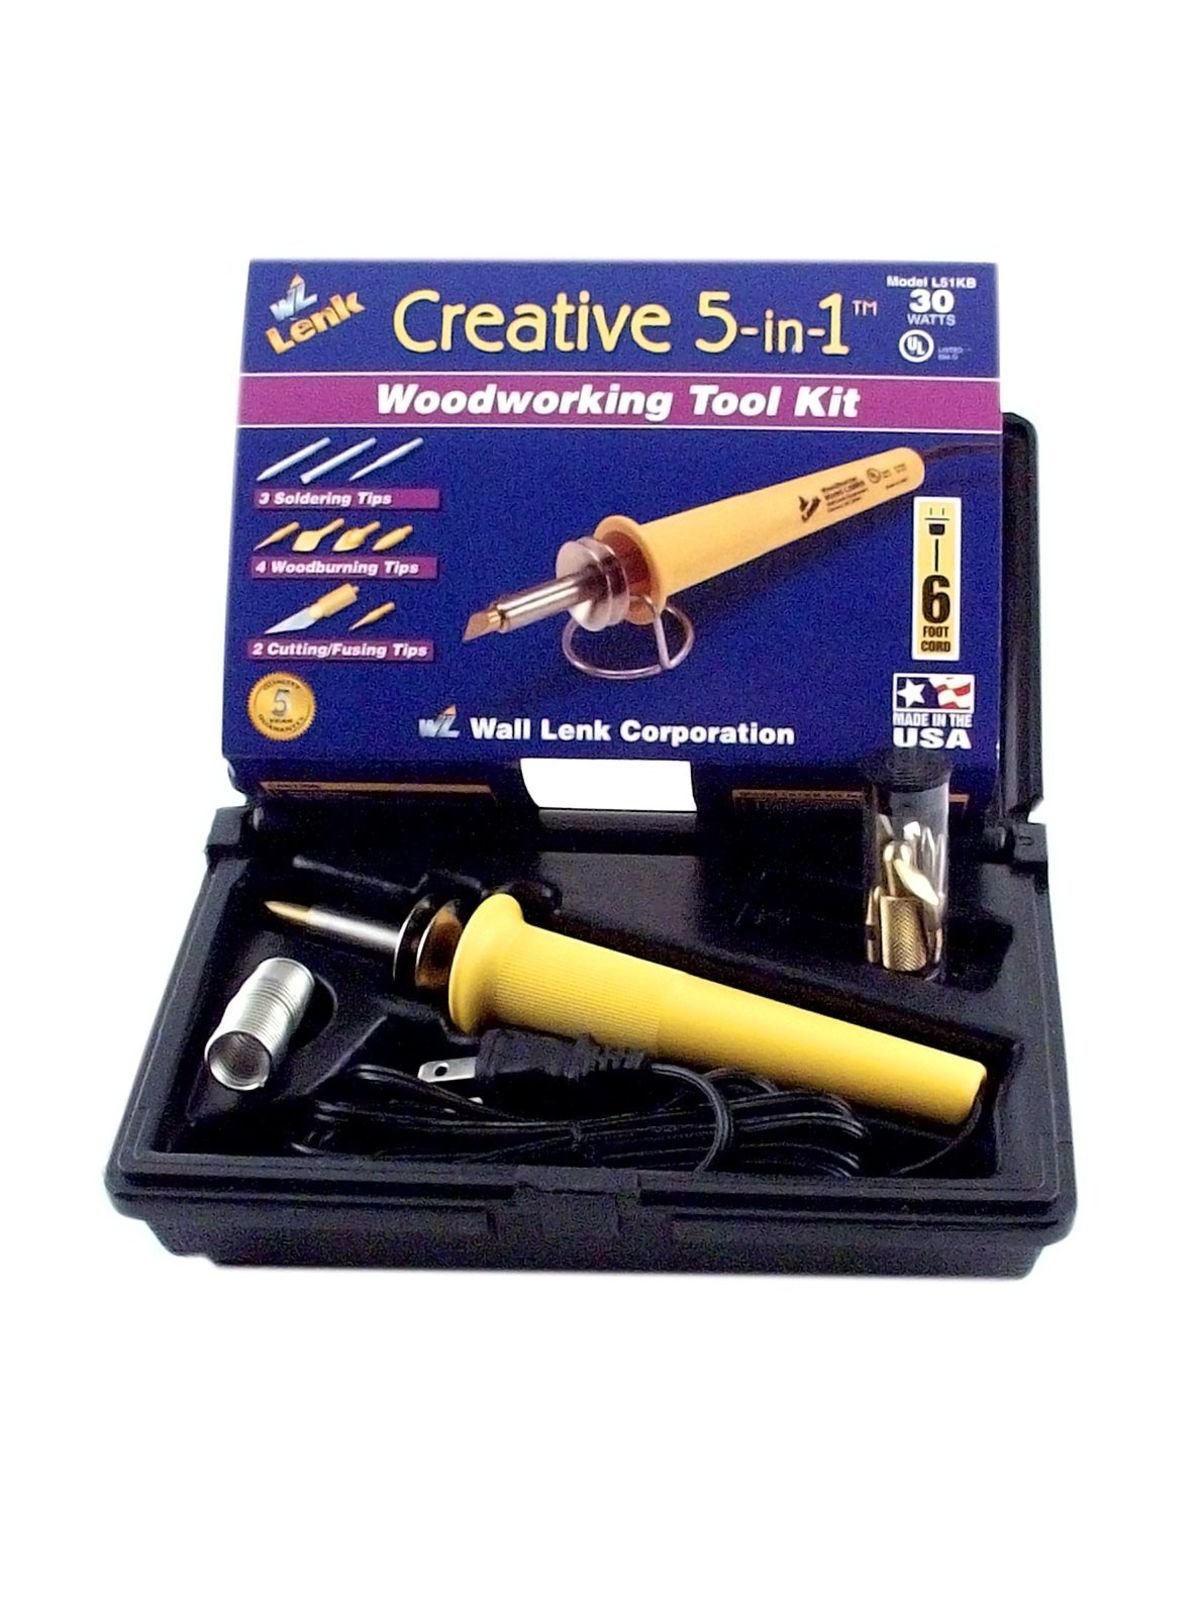 Wall Lenk Corporation - Creative 5 - In - 1 Tool Kit